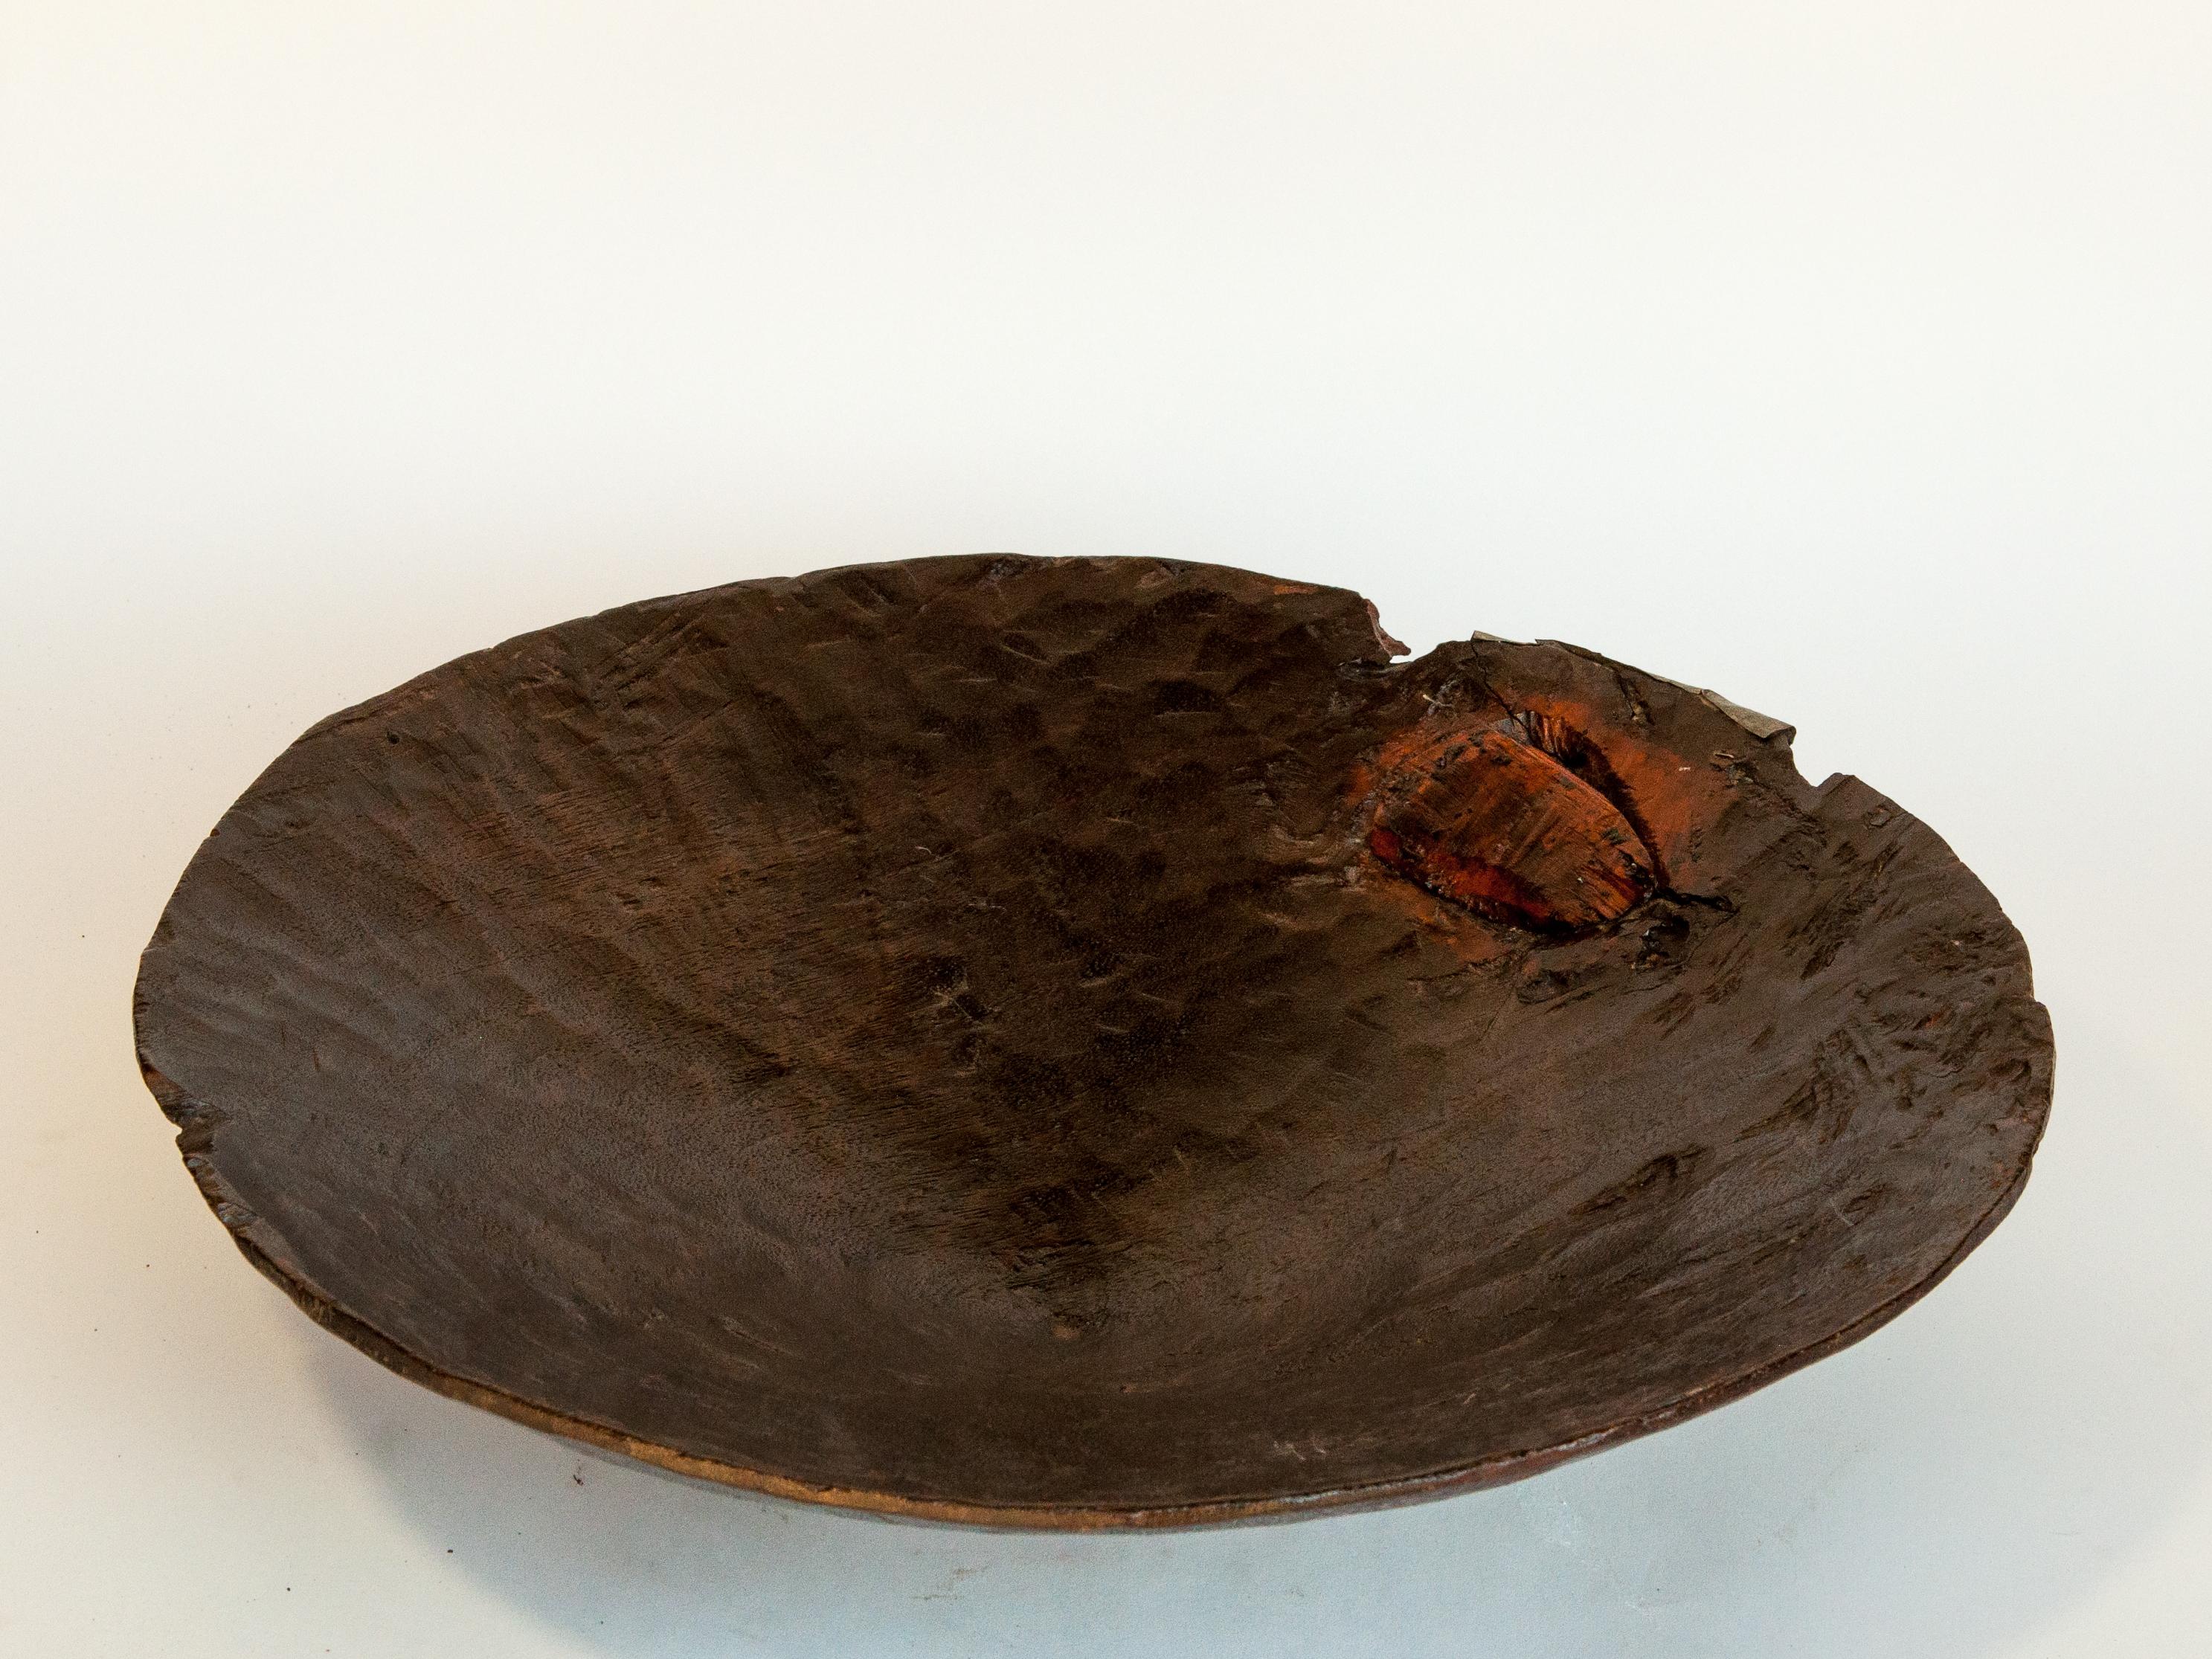 Vintage gold panning tray / bowl from Northeast Thailand, mid-late 20th century. Measures: 20.25 inch diameter.
Fashioned from a single piece of local hardwood. Used to pan for gold in the rivers and streams of northeast Thailand.
We have leveled